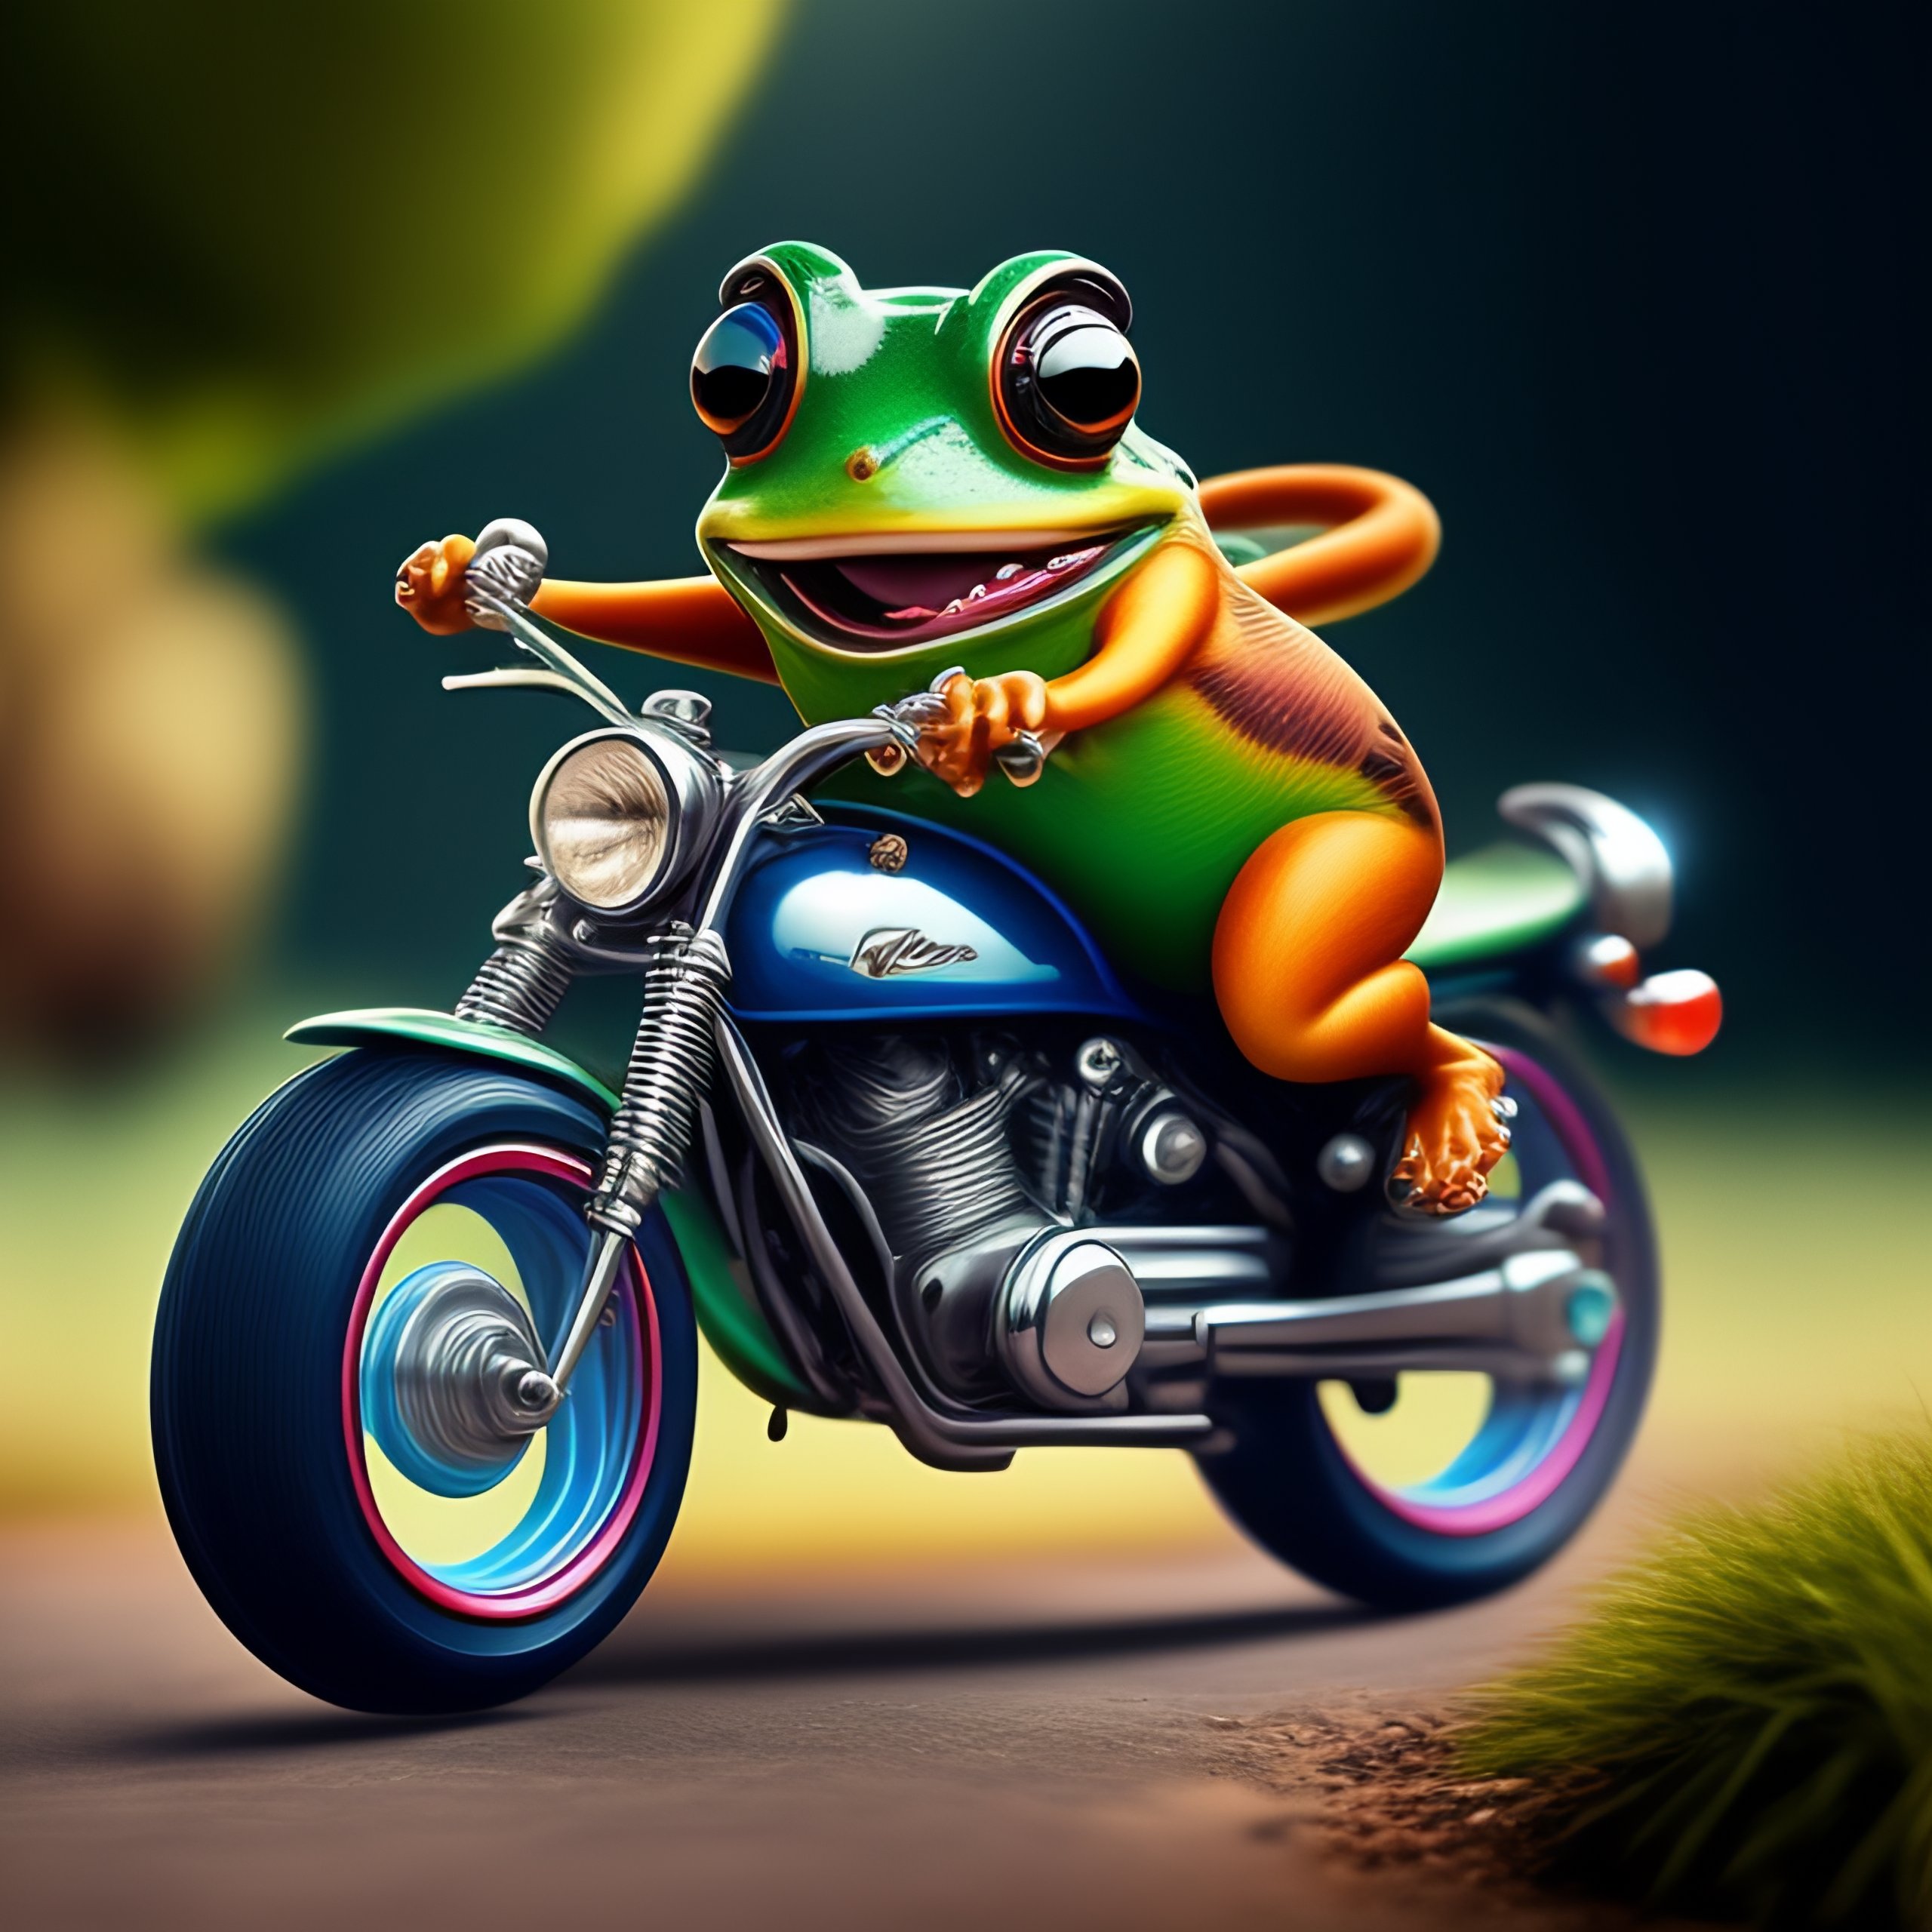 Lexica - Crazy frog, on one wheel, motorcycle, dead